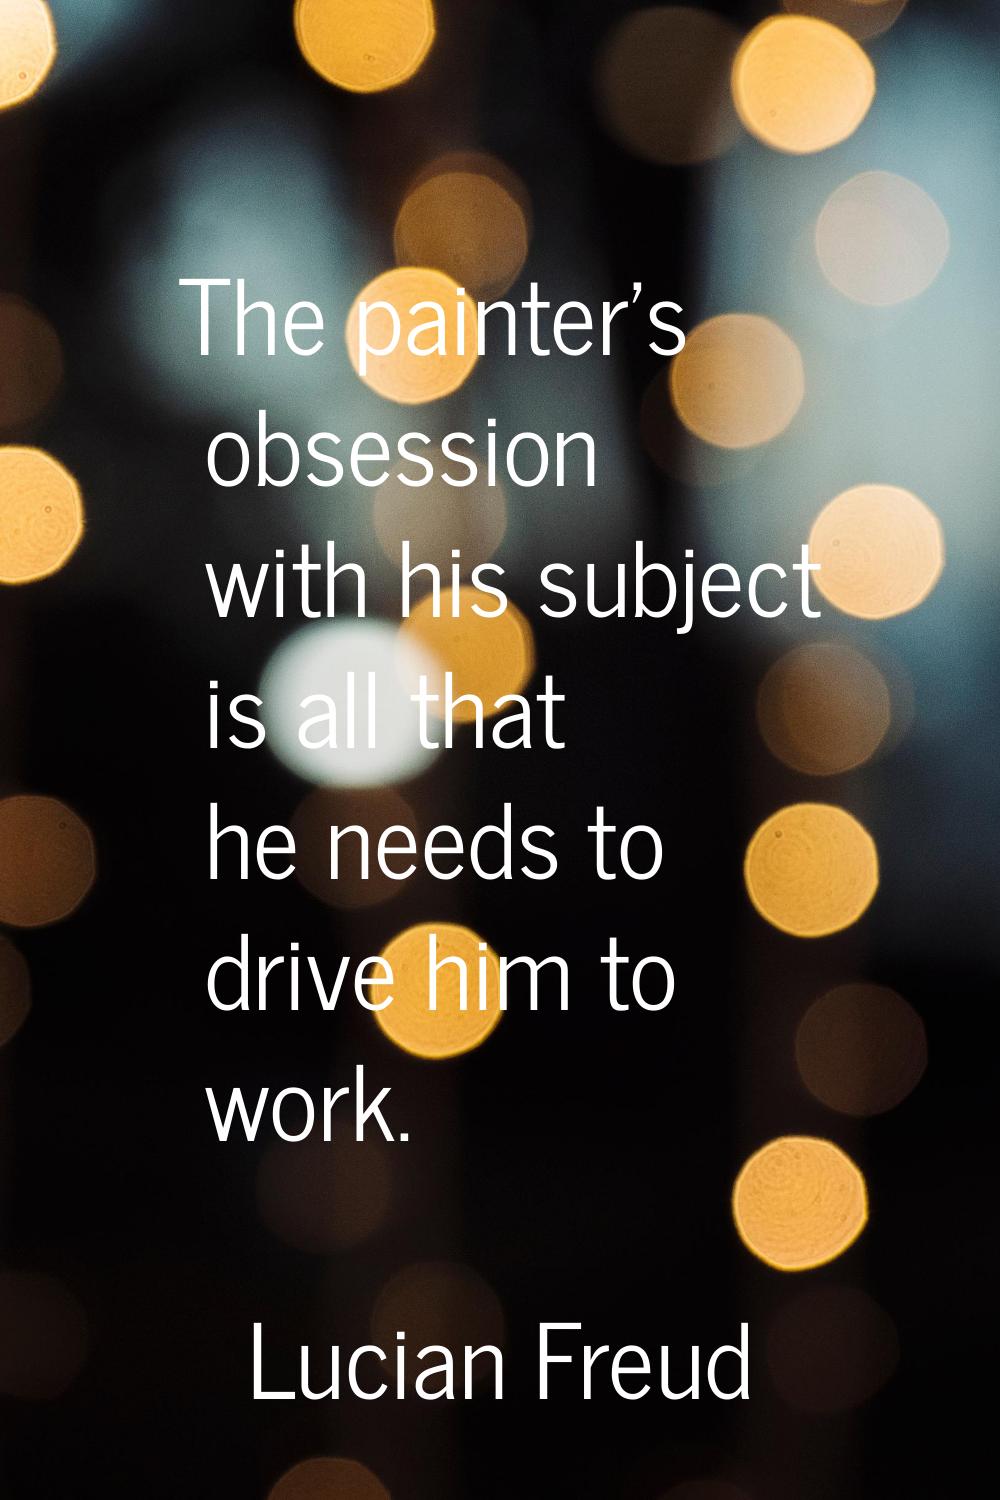 The painter's obsession with his subject is all that he needs to drive him to work.